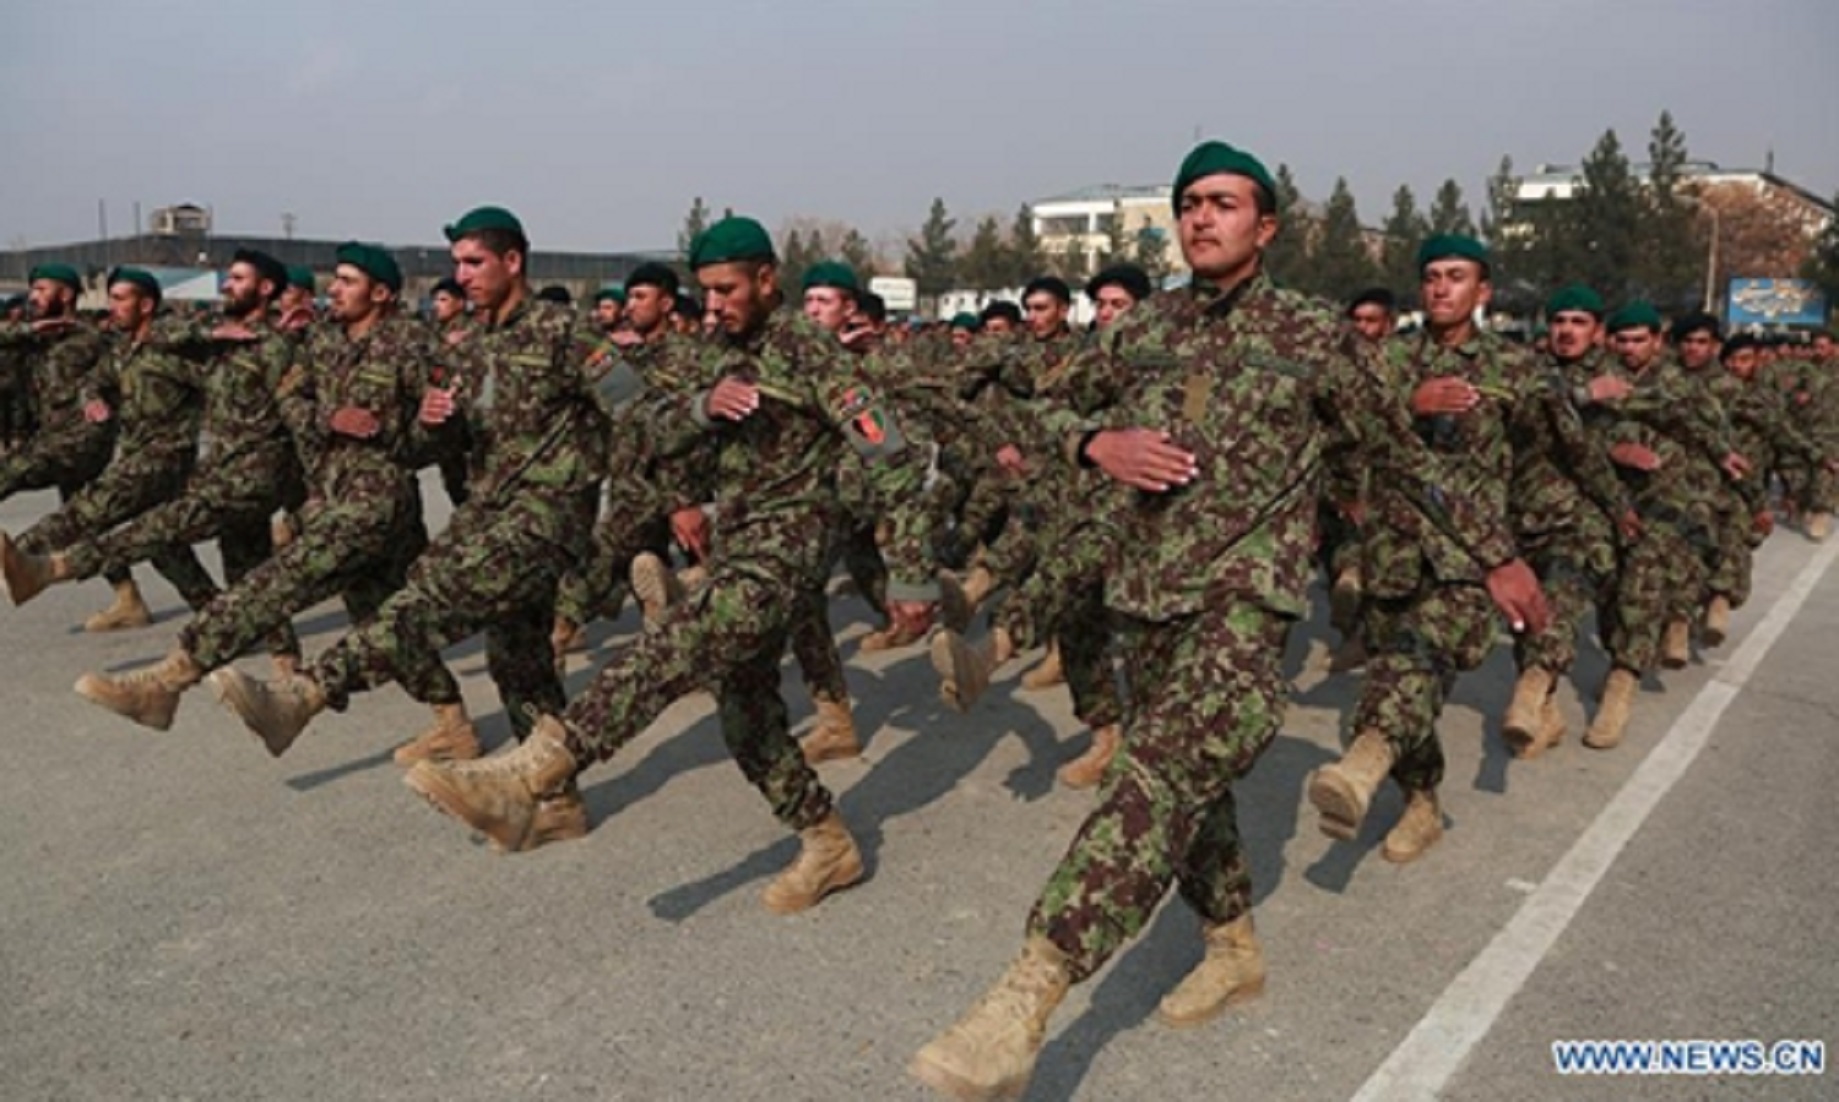 Over 1,400 Recruits Join Afghan Army After Military Training